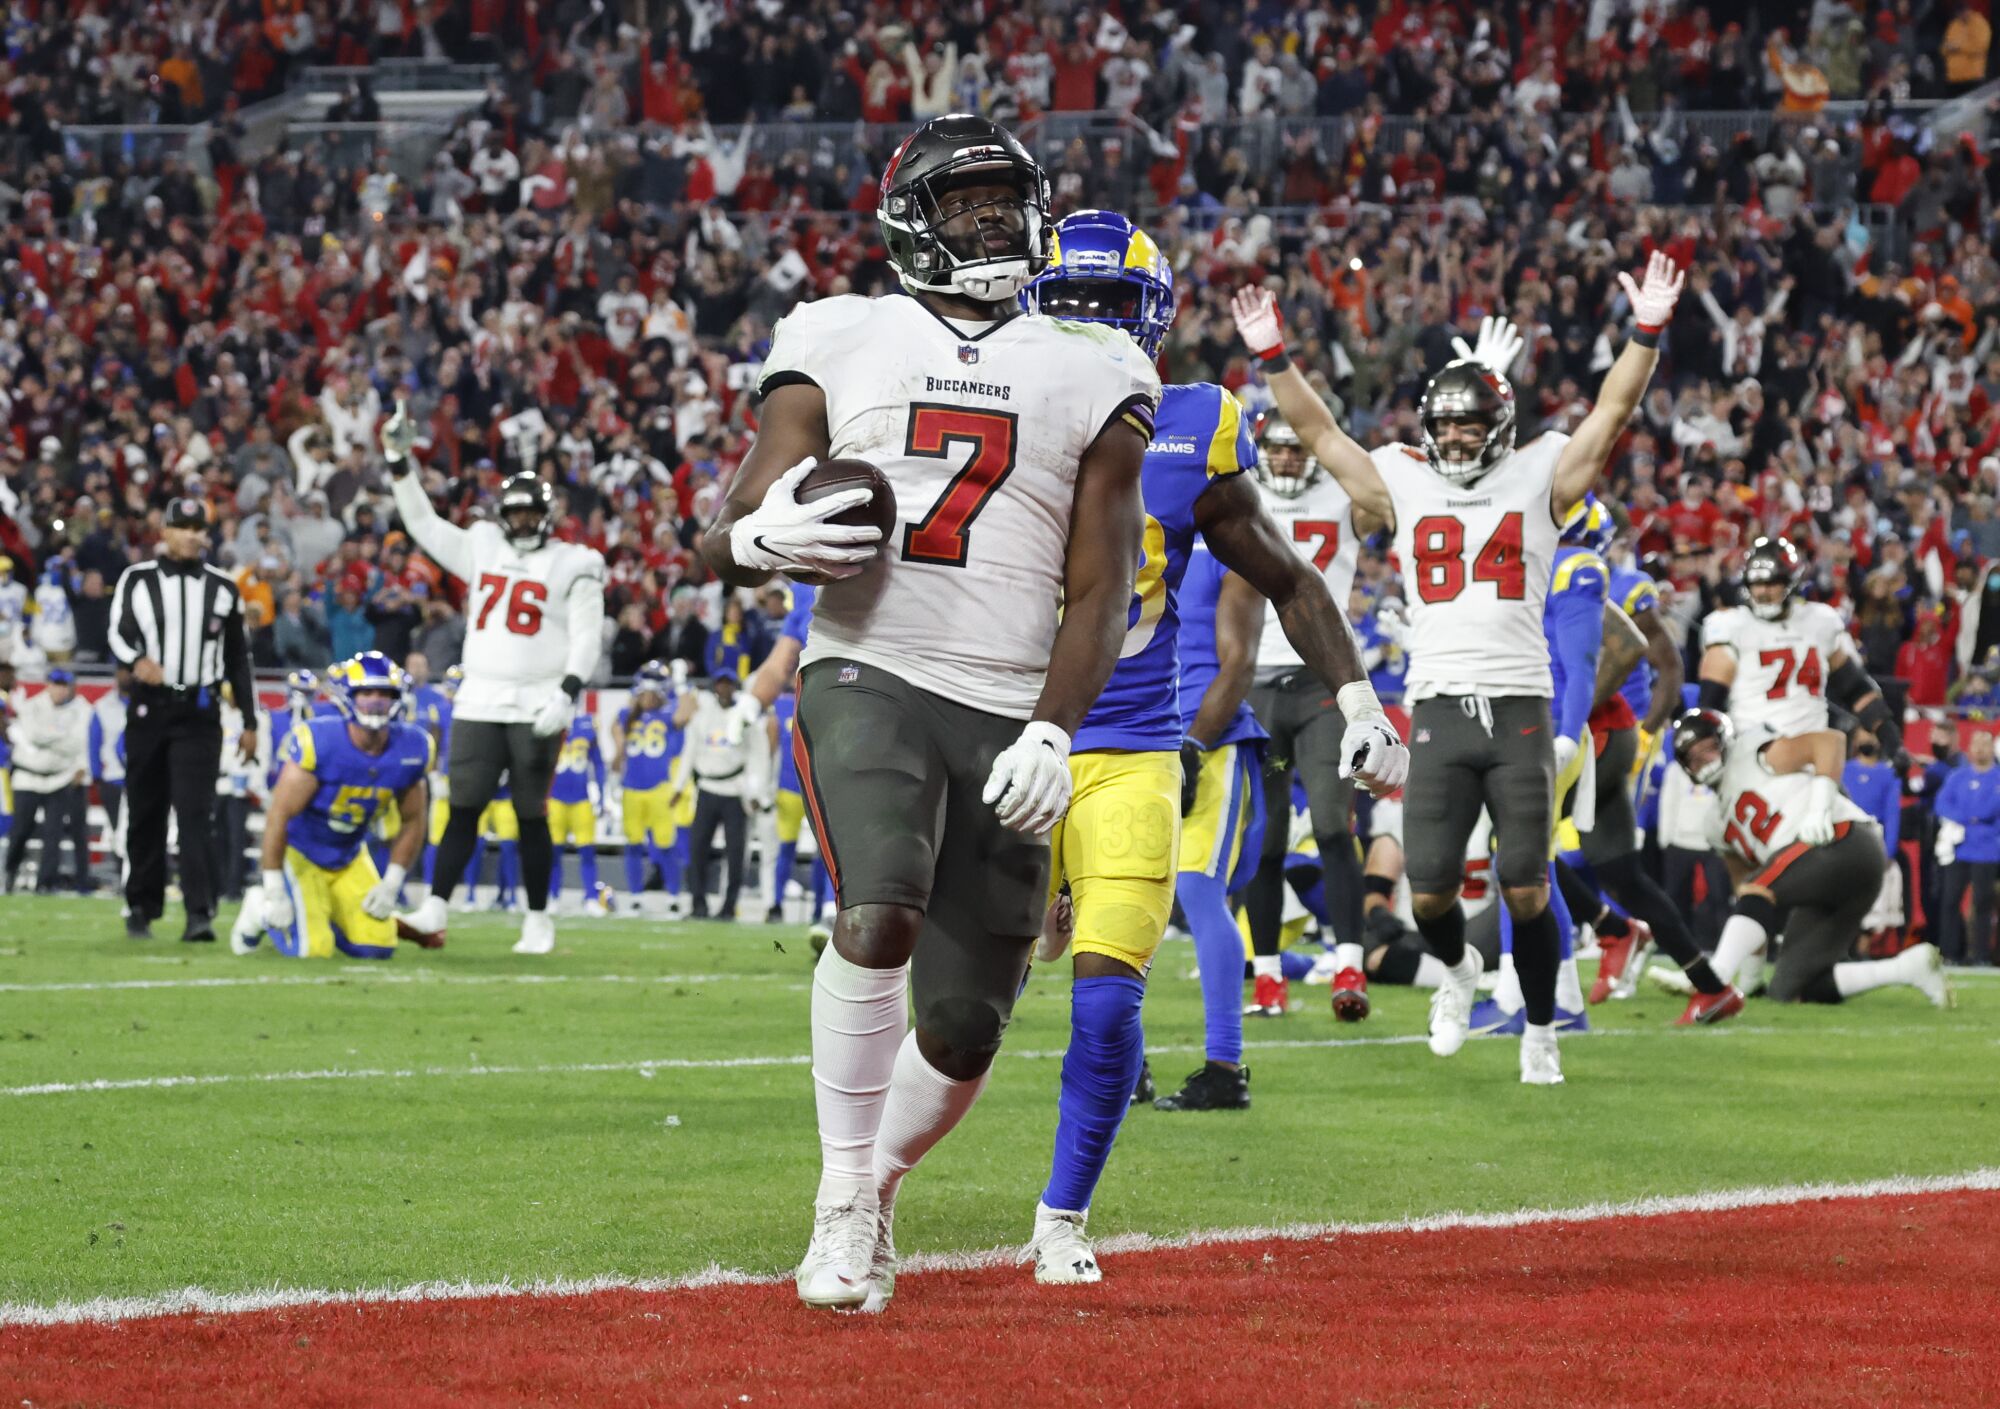 Tampa Bay Buccaneers running back Leonard Fournette scores on a 9-yard run on fourth down